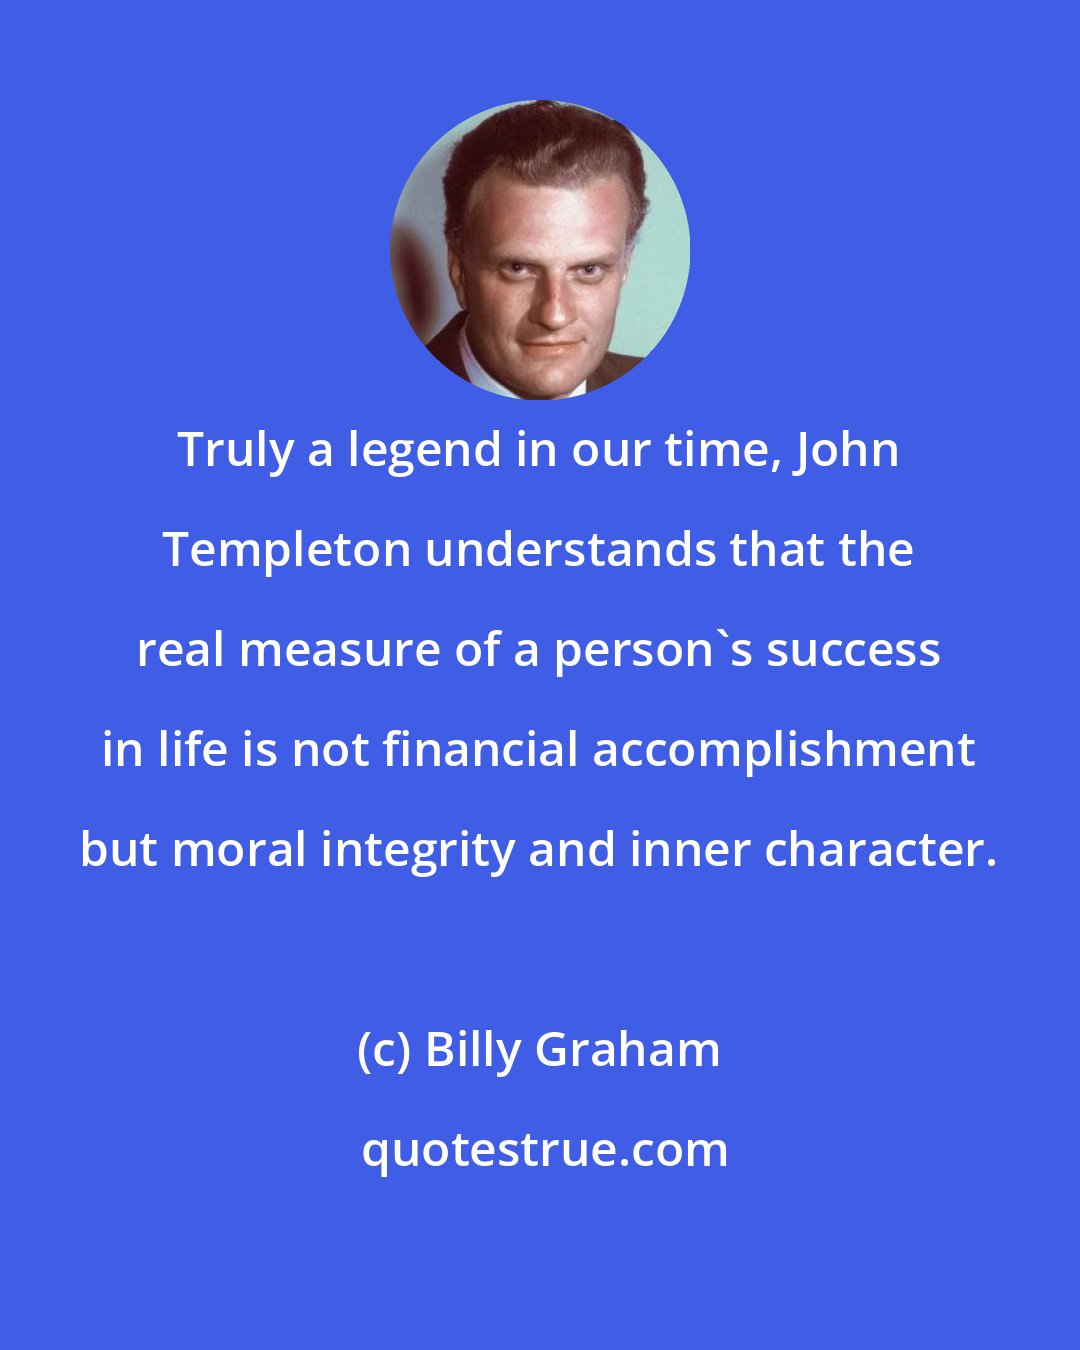 Billy Graham: Truly a legend in our time, John Templeton understands that the real measure of a person's success in life is not financial accomplishment but moral integrity and inner character.